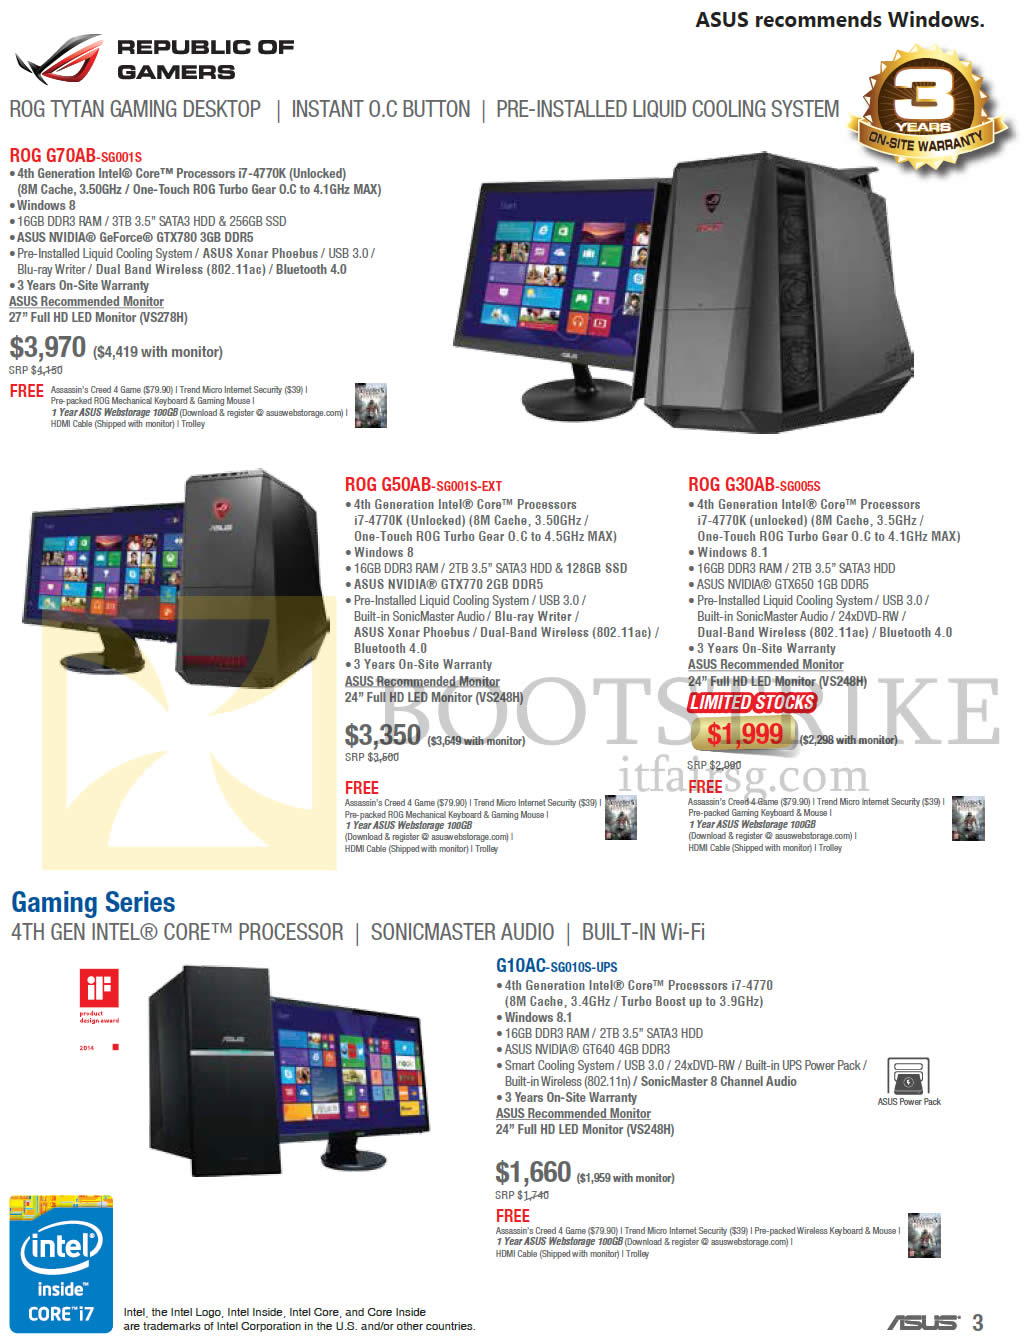 PC SHOW 2014 price list image brochure of ASUS Desktop PCs Gaming ROG G70AB-SG001S, G50AB-SG001S-EXT, G30AB-SG005S, G10AC-SG010S-UPS